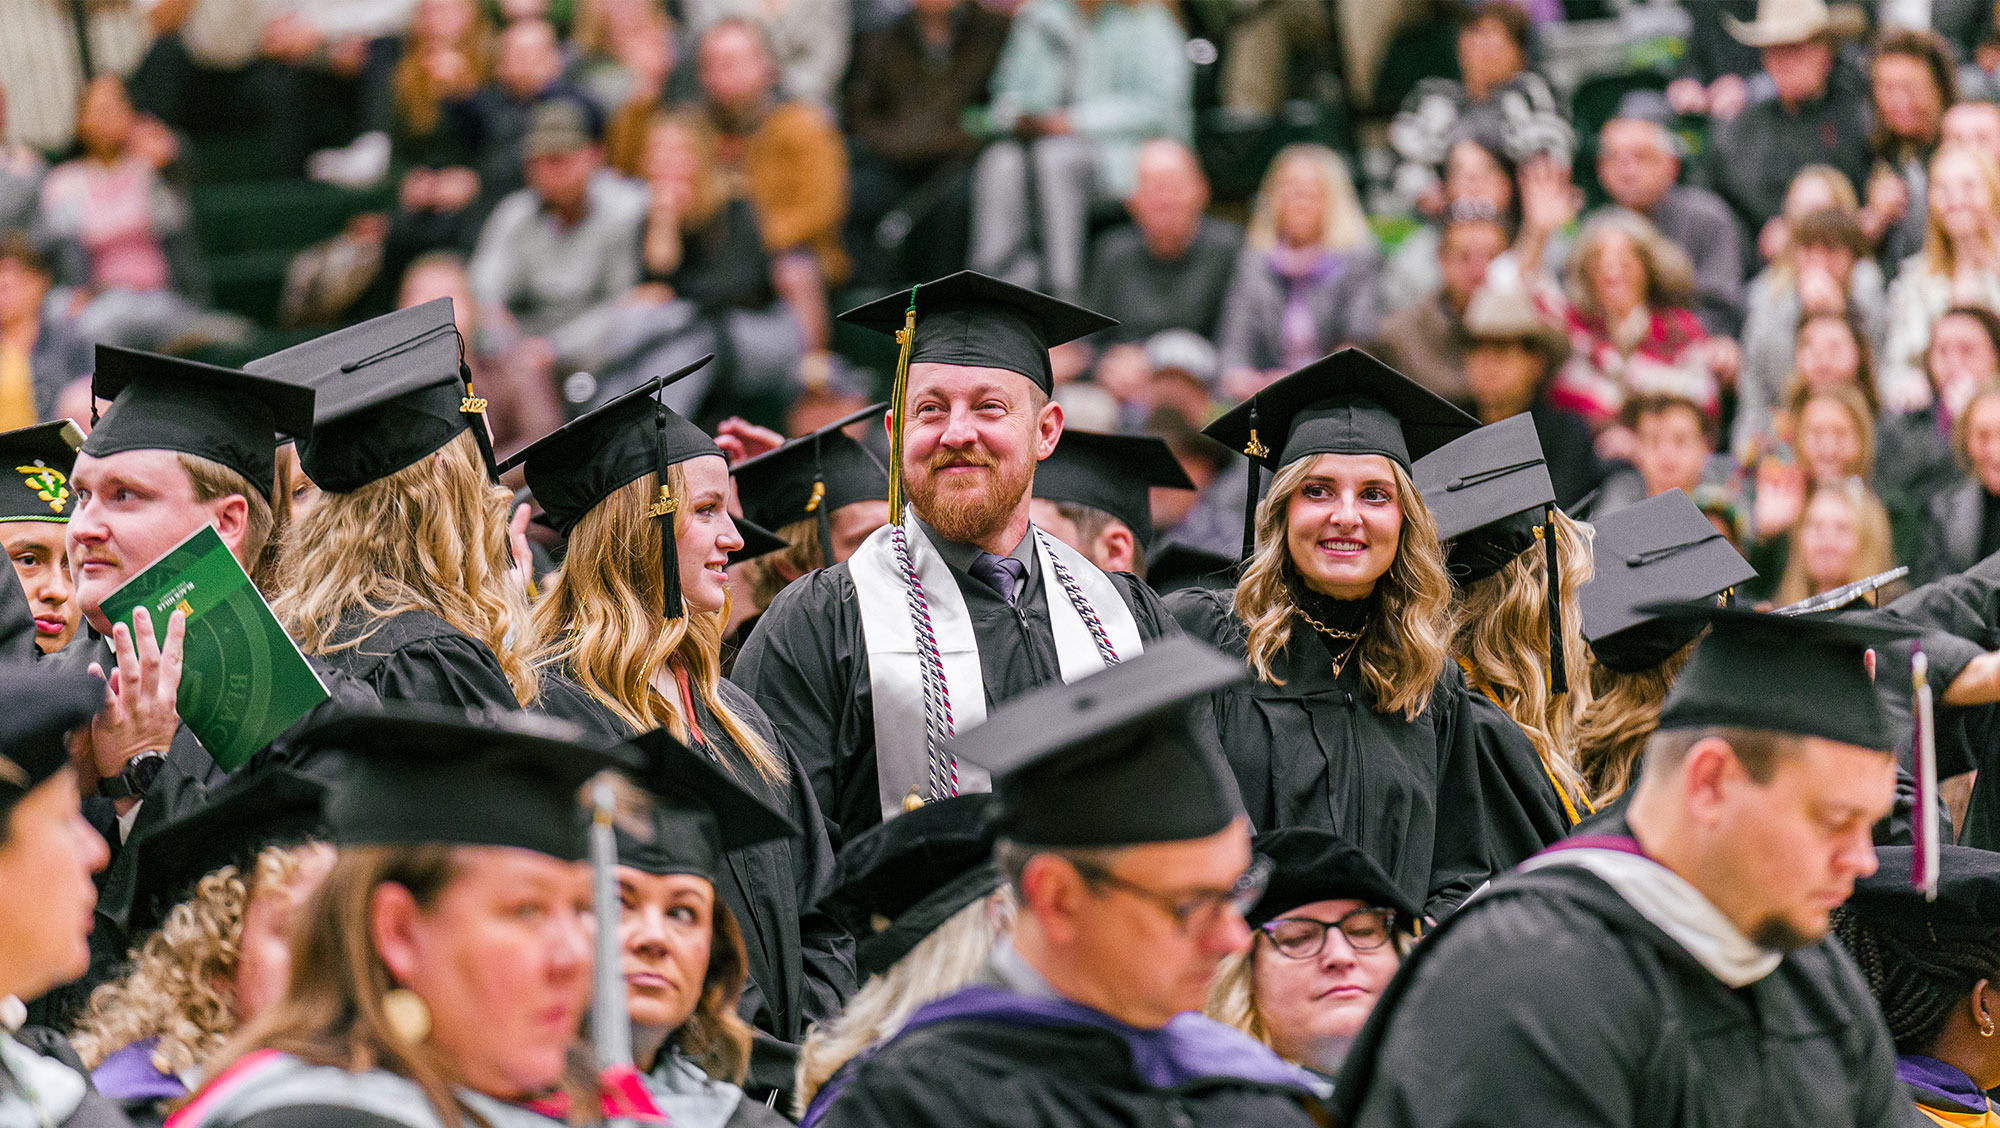 BHSU graduates stand in excited at the Fall 2022 Commencement Ceremony at BHSU.